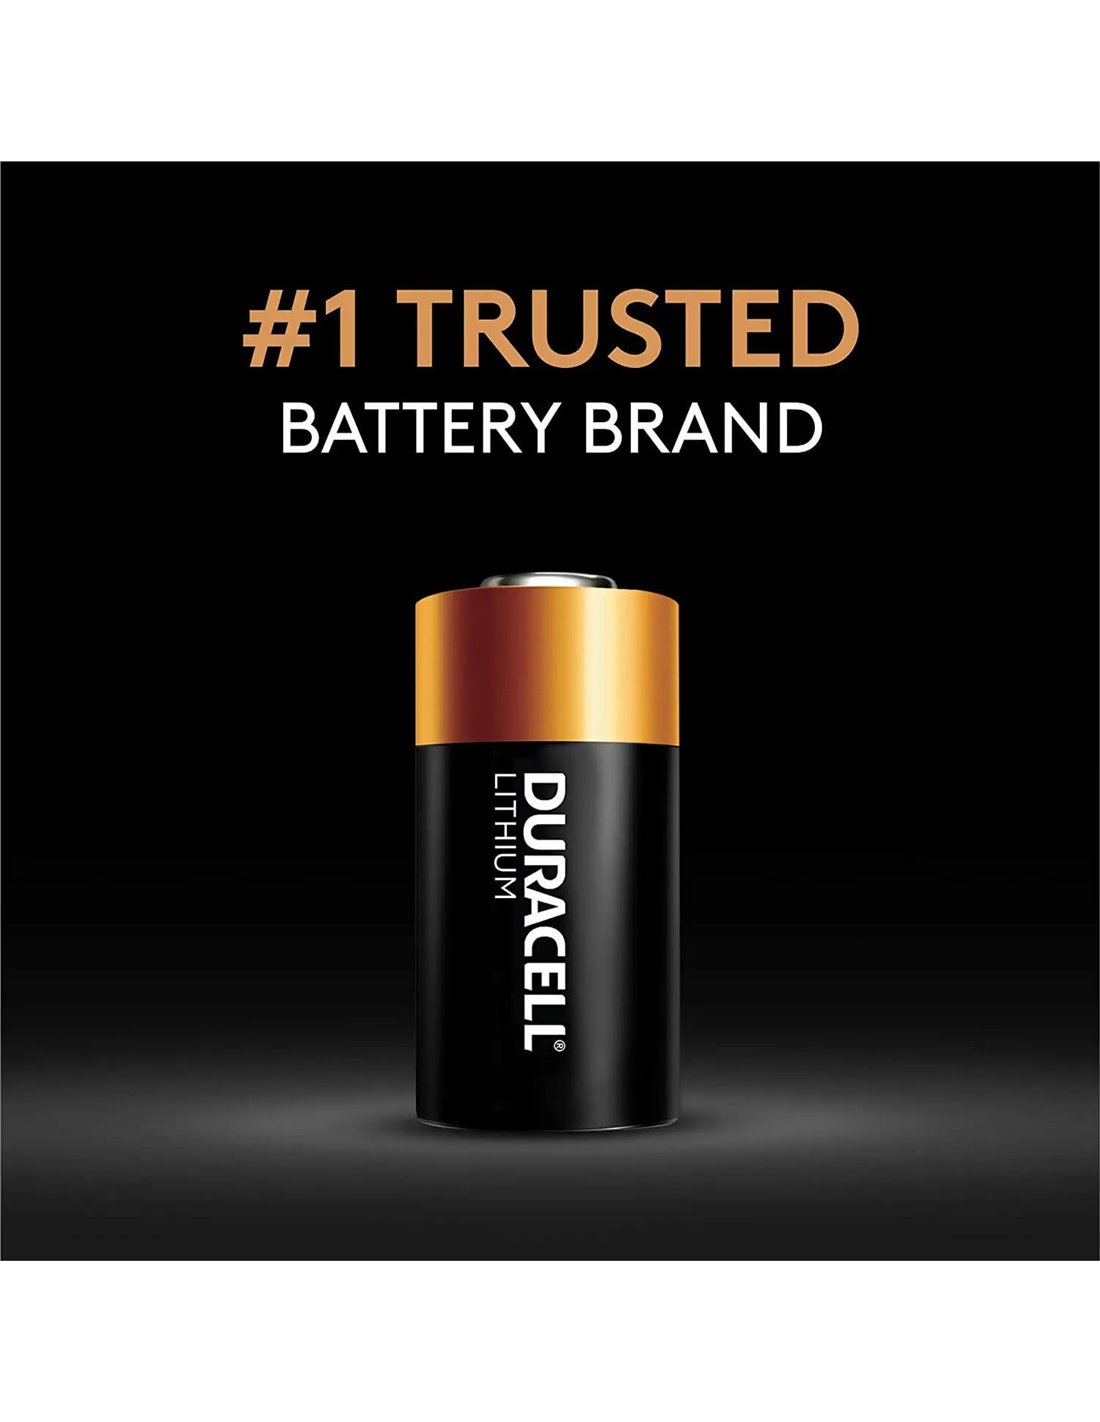 Duracell 3V DL123A 1400Mah Lithium Battery replaces CR123, CR123A - Non Rechargeable